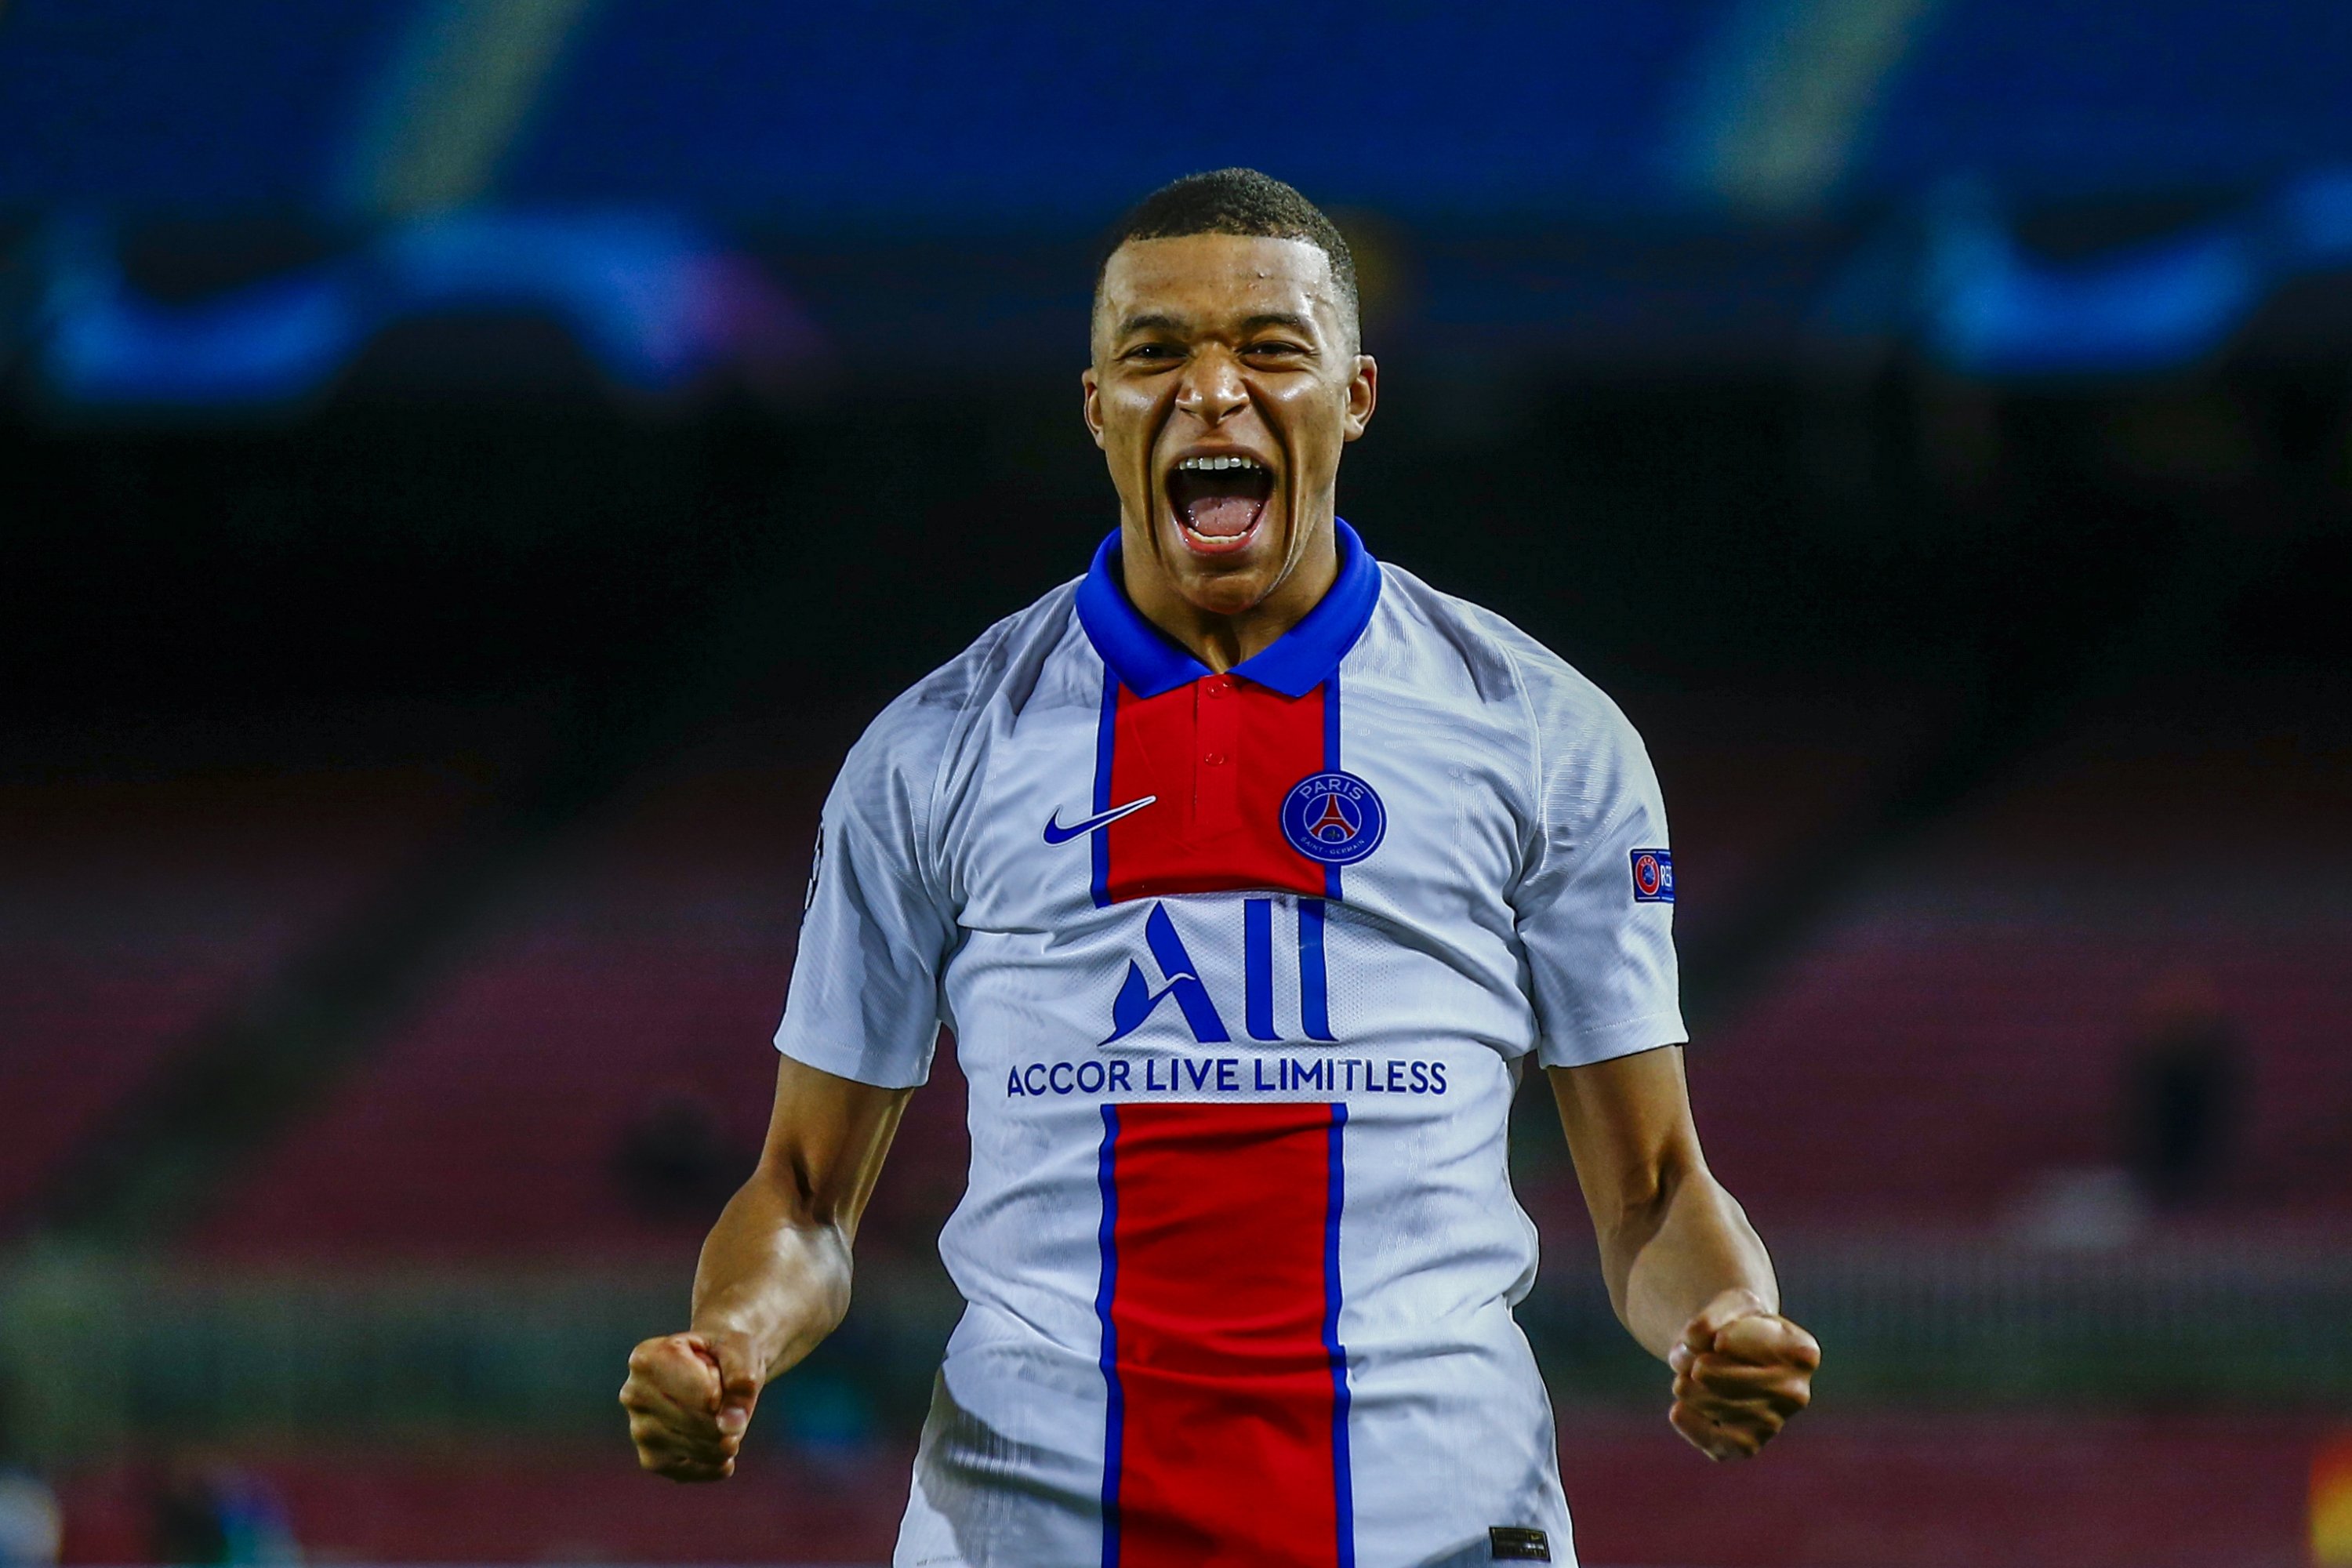 PSG's Kylian Mbappe celebrates after scoring a goal against Barcelona in the Champions League round of 16, first leg match at the Camp Nou, Barcelona, Spain, Feb. 16, 2021. (AP Photo)